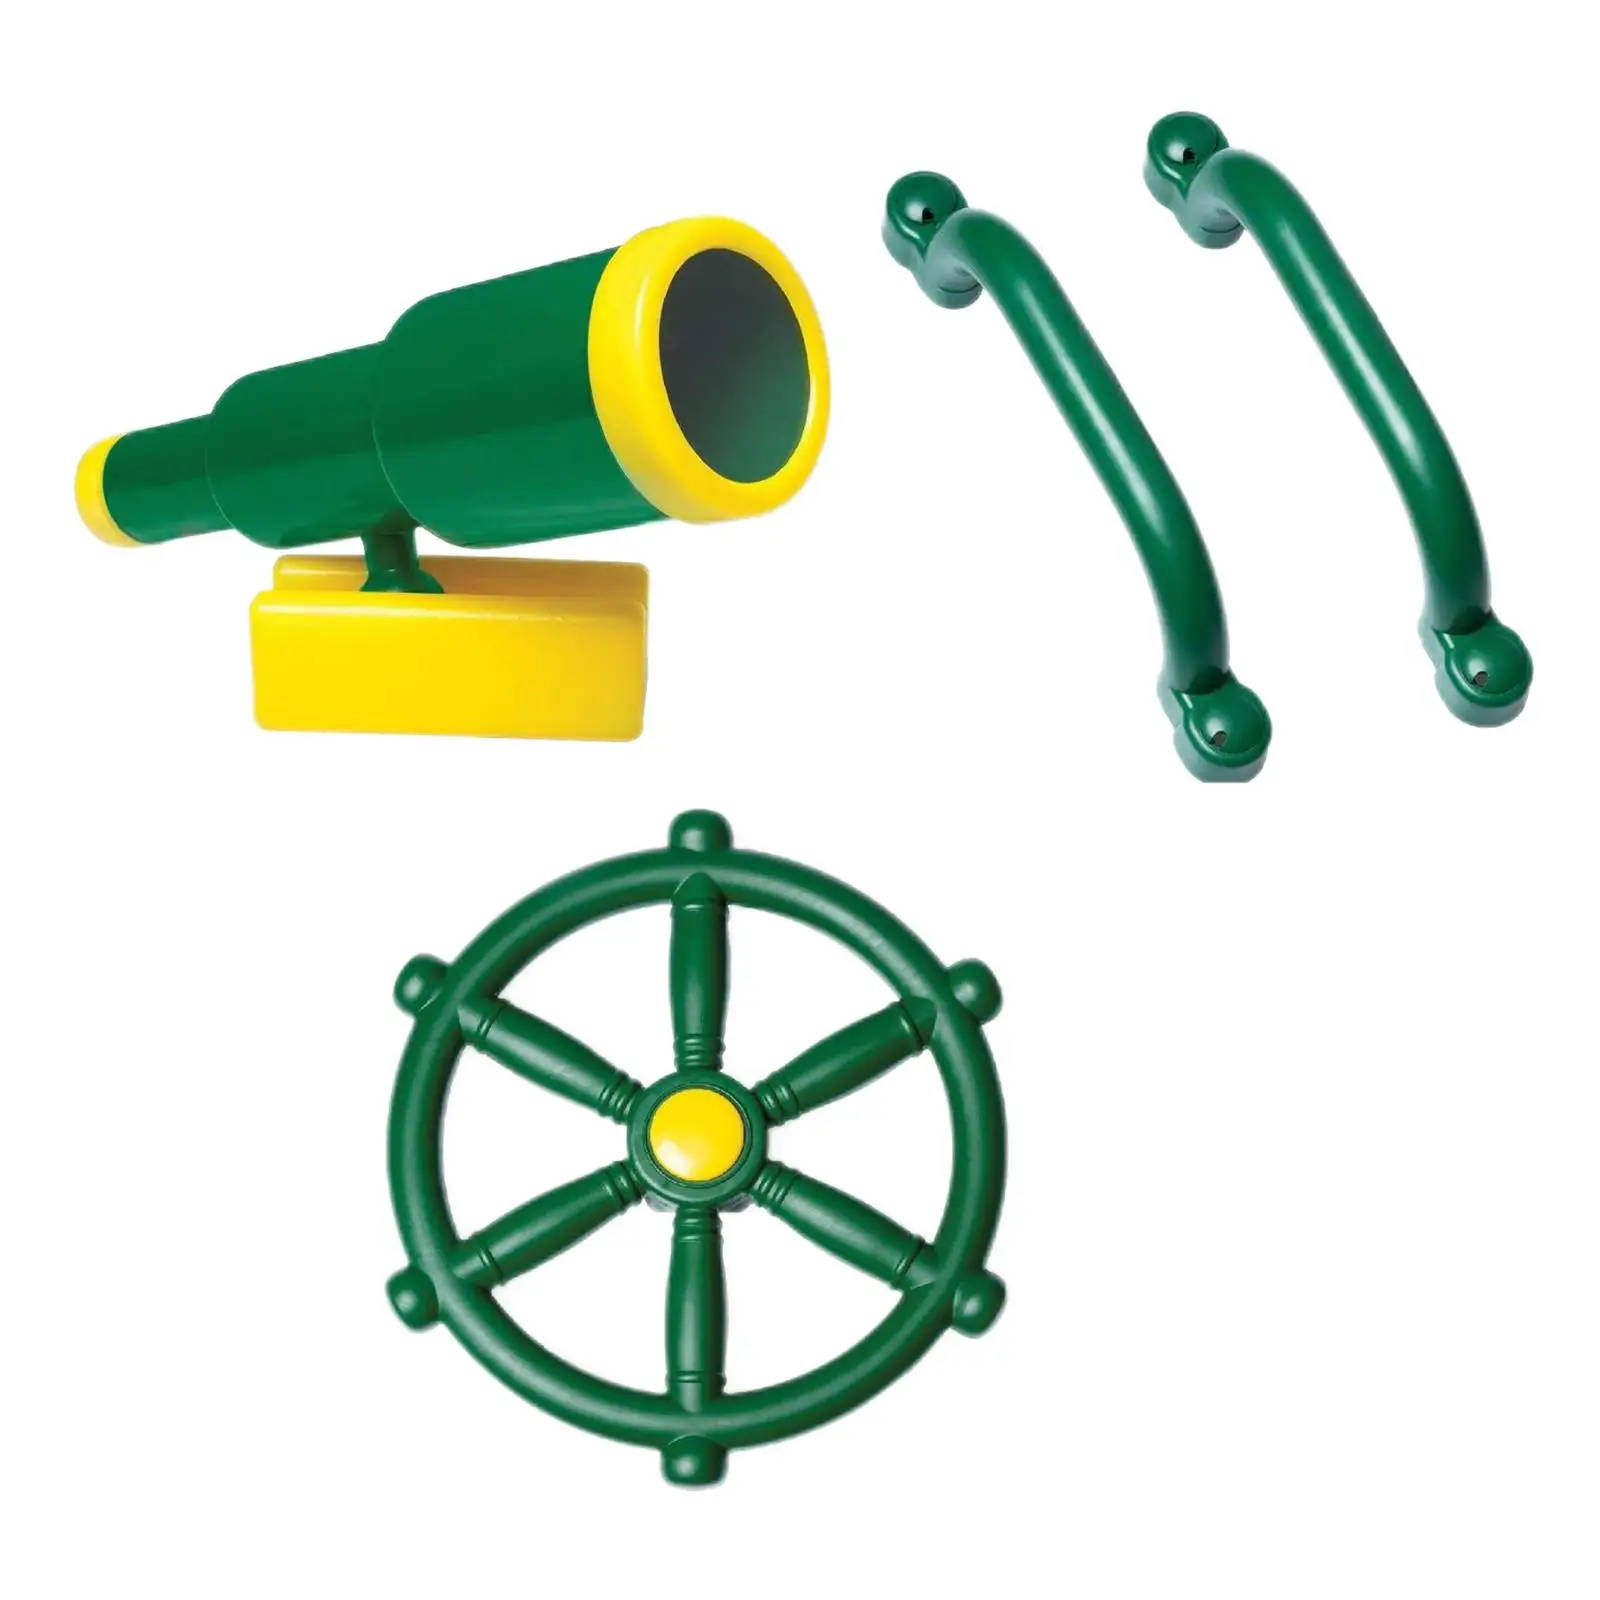 4 Pieces Playground Equipment Set Kids Pirate Telescope Steering Wheel & Safety Handle Bars for Treehouse